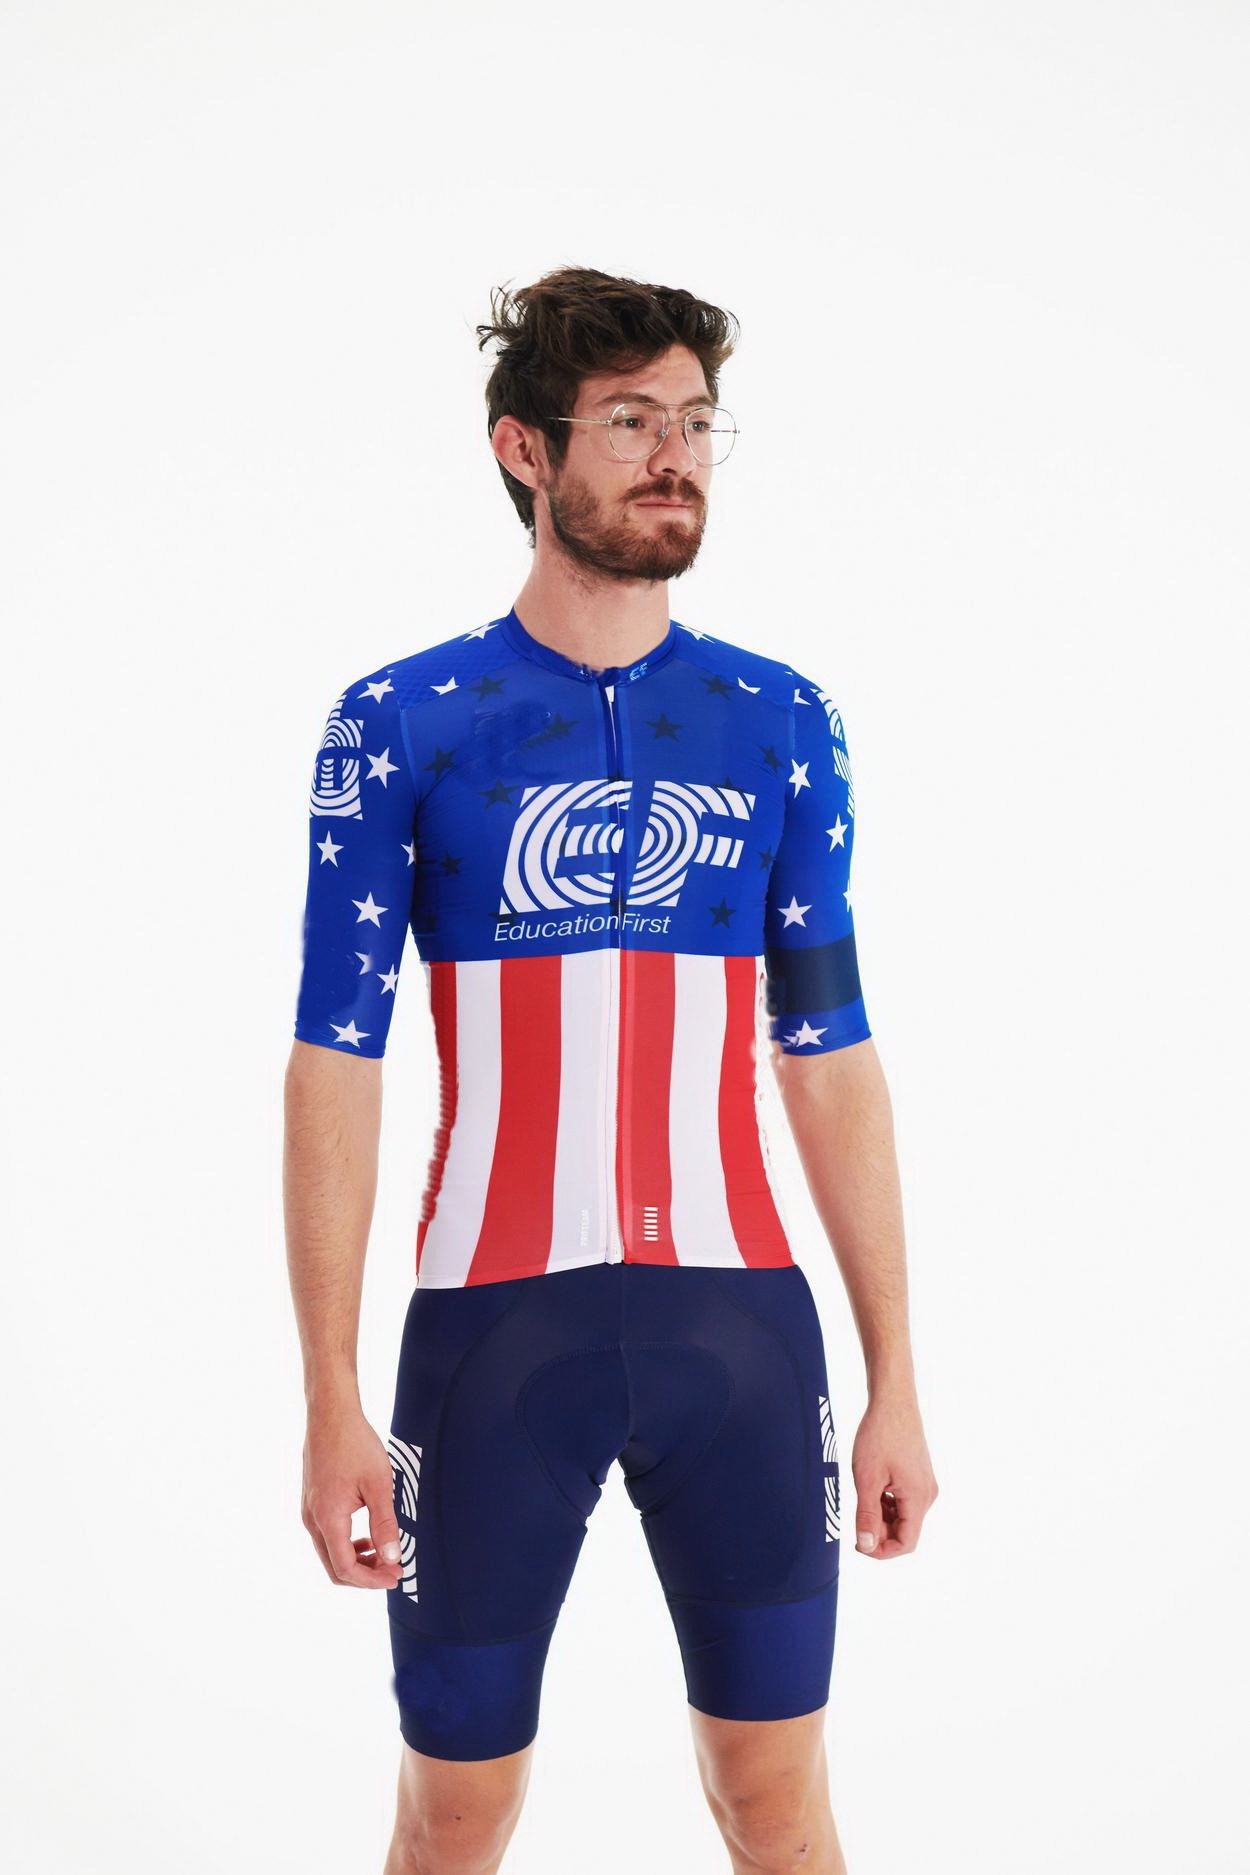 

2020 EF EDUCATION FIRST TEAM USA SHORT SLEEVE CYCLING JERSEY SUMMER CYCLING WEAR ROPA CICLISMO+ BIB SHORTS 3D GEL PAD SET SIZE:XS-4XL, Only jersey